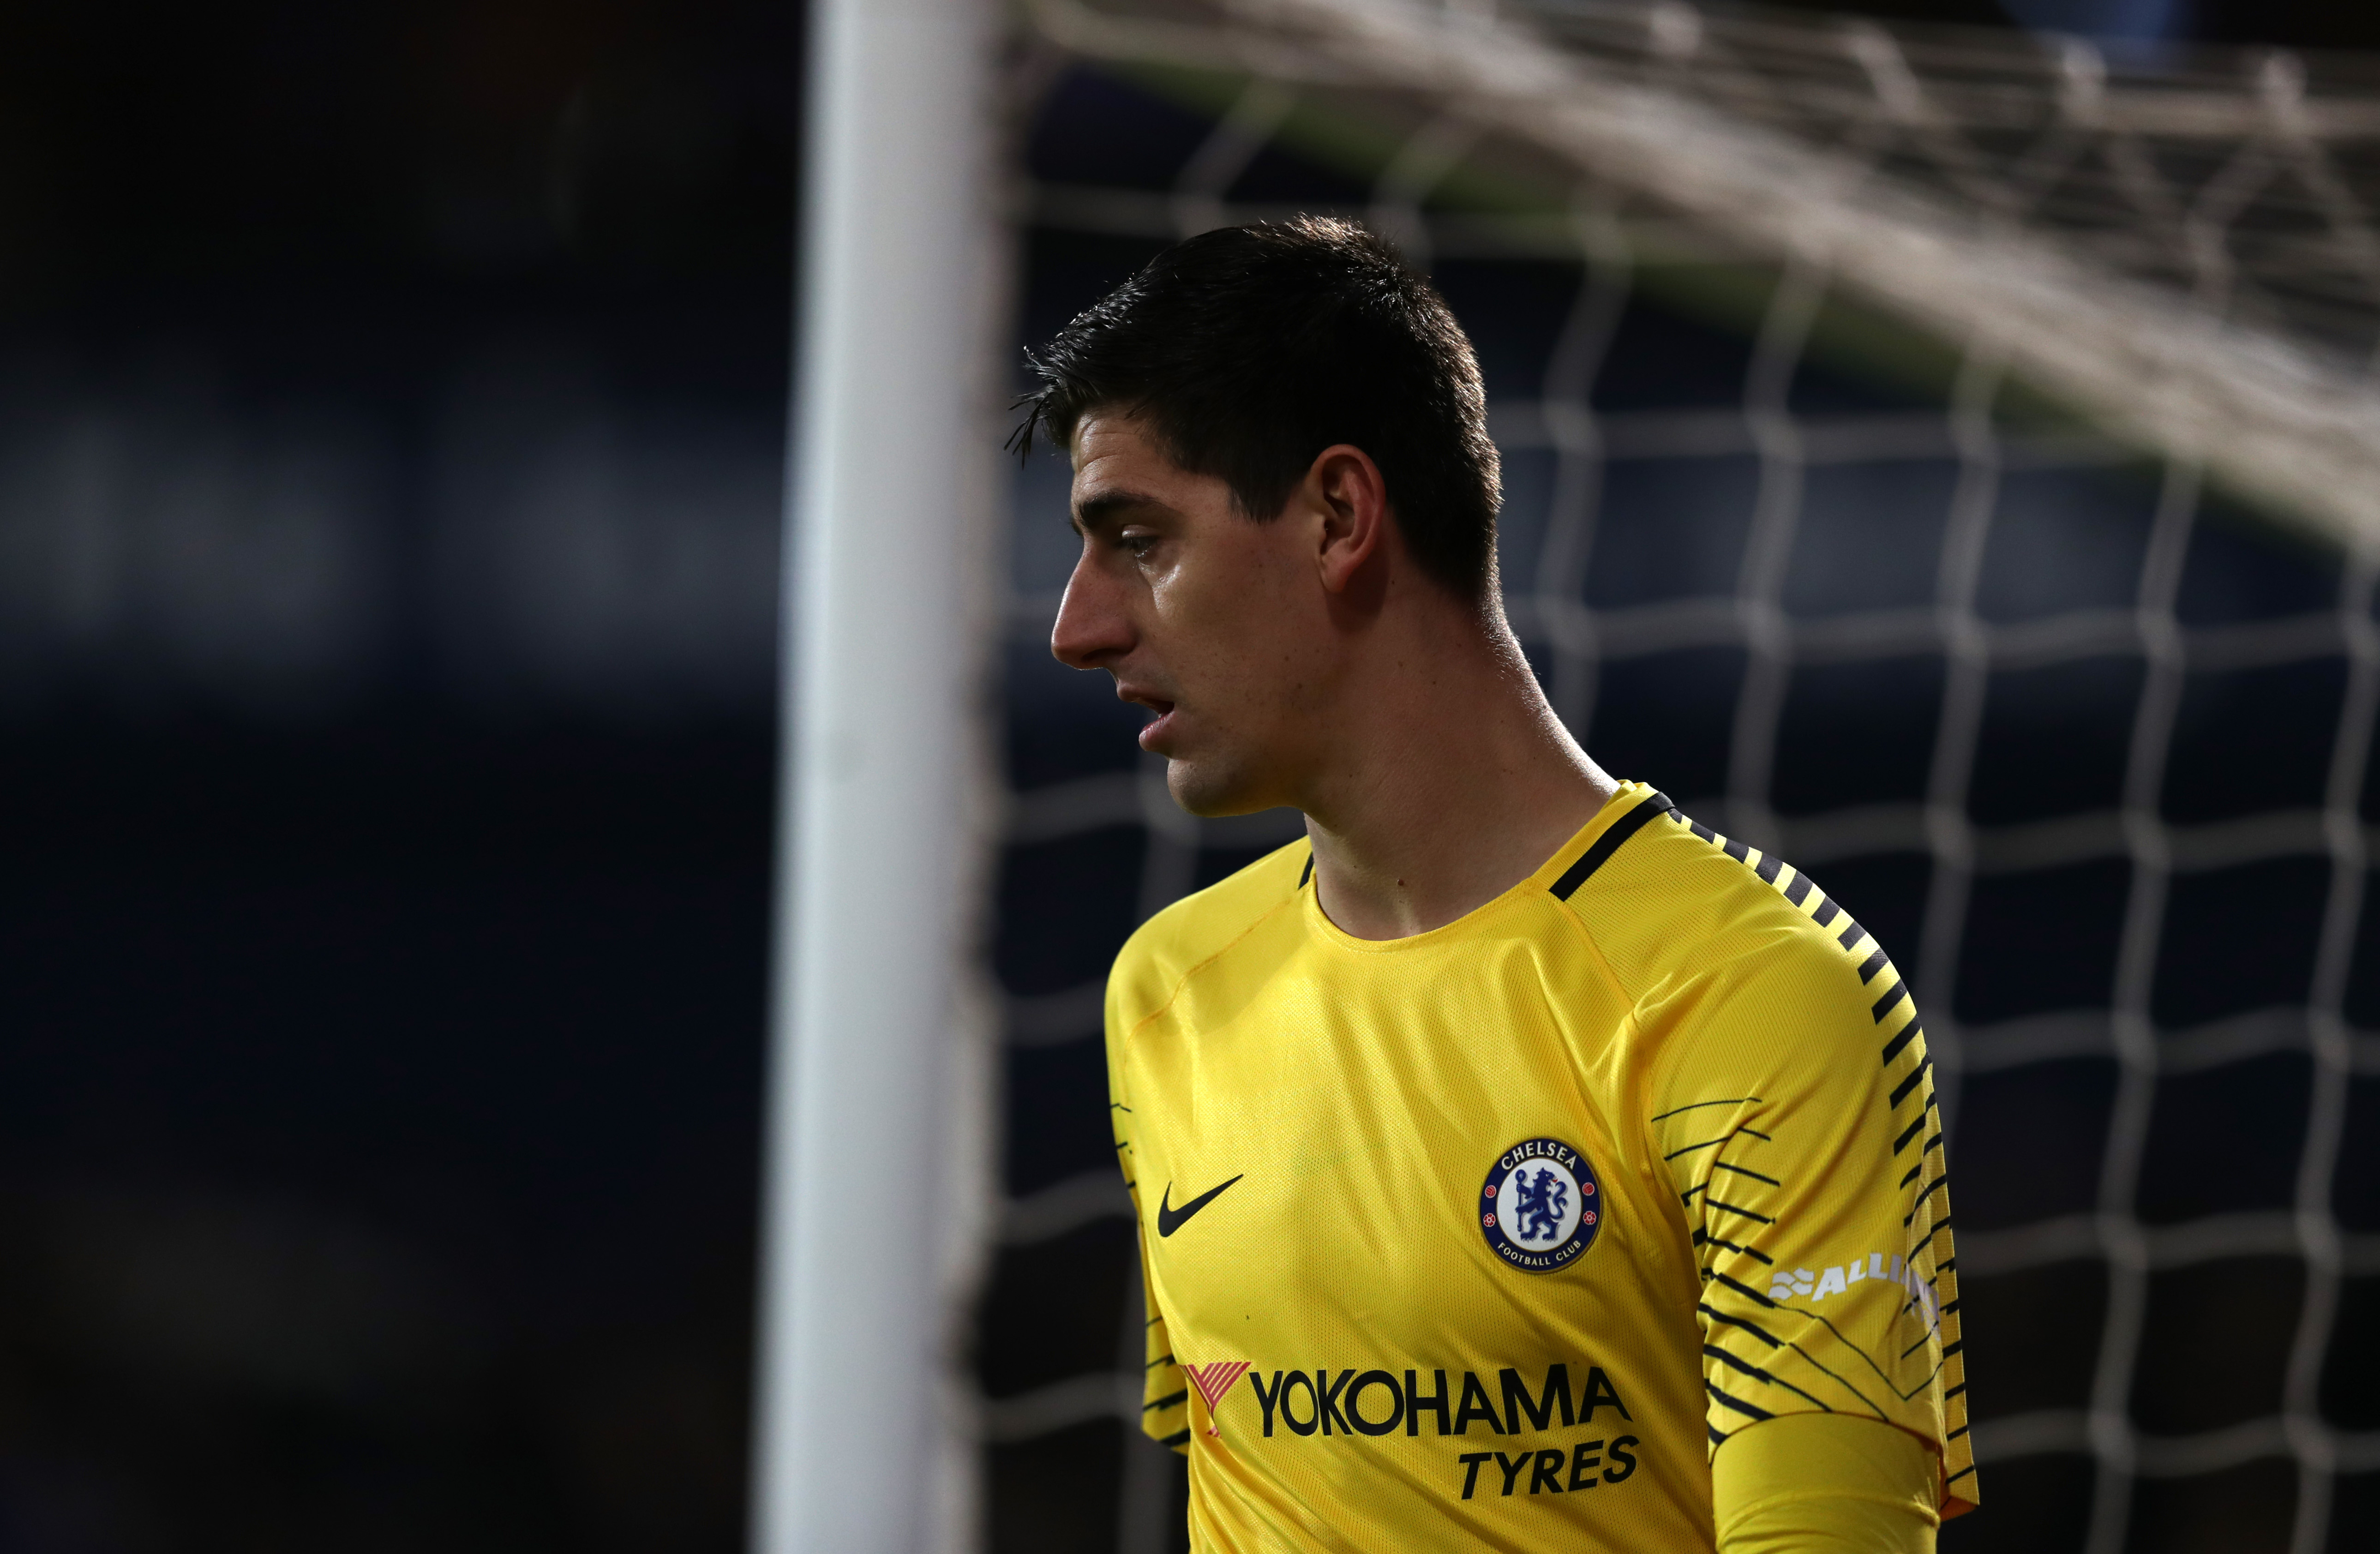 WEST BROMWICH, ENGLAND - NOVEMBER 18: Chelsea goalkeeper Thibaut Courtois during the Premier League match between West Bromwich Albion and Chelsea at The Hawthorns on November 18, 2017 in West Bromwich, England. (Photo by Catherine Ivill/Getty Images)